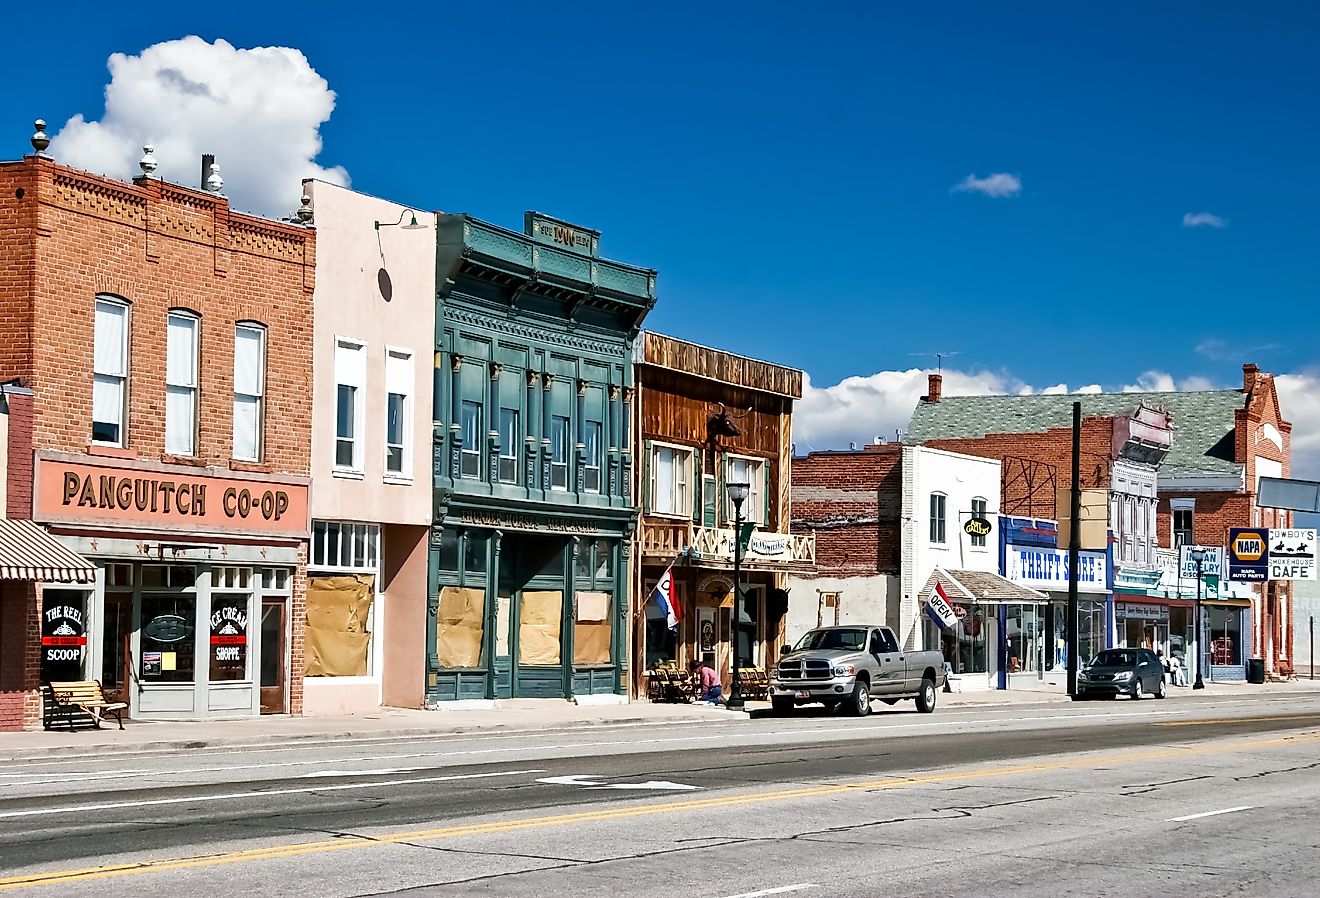 Historic downtown street in Panguitch, Utah.